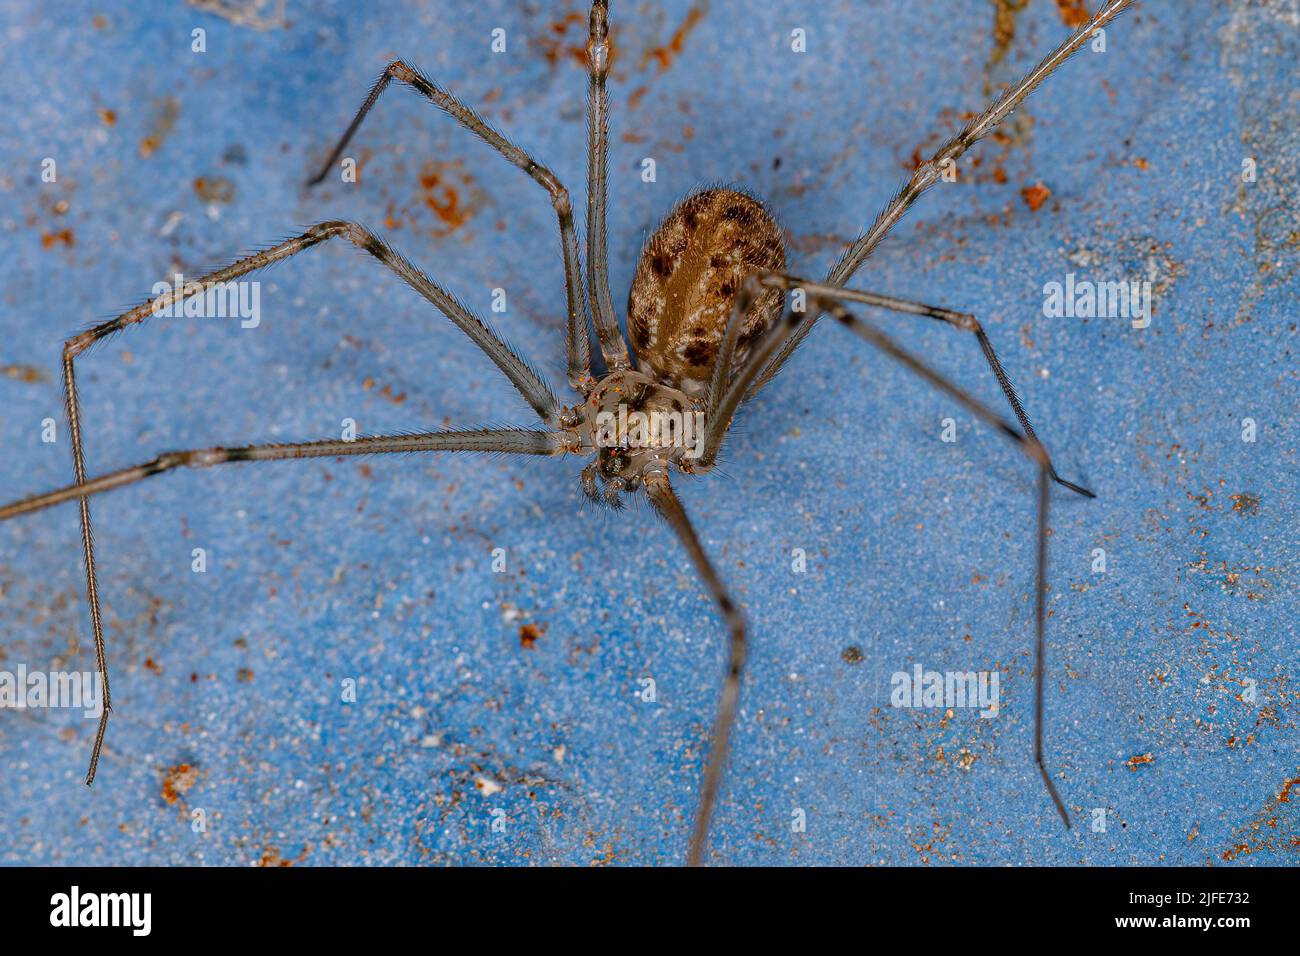 Adult Male Short-bodied Cellar Spider of the species Physocyclus globosus Stock Photo